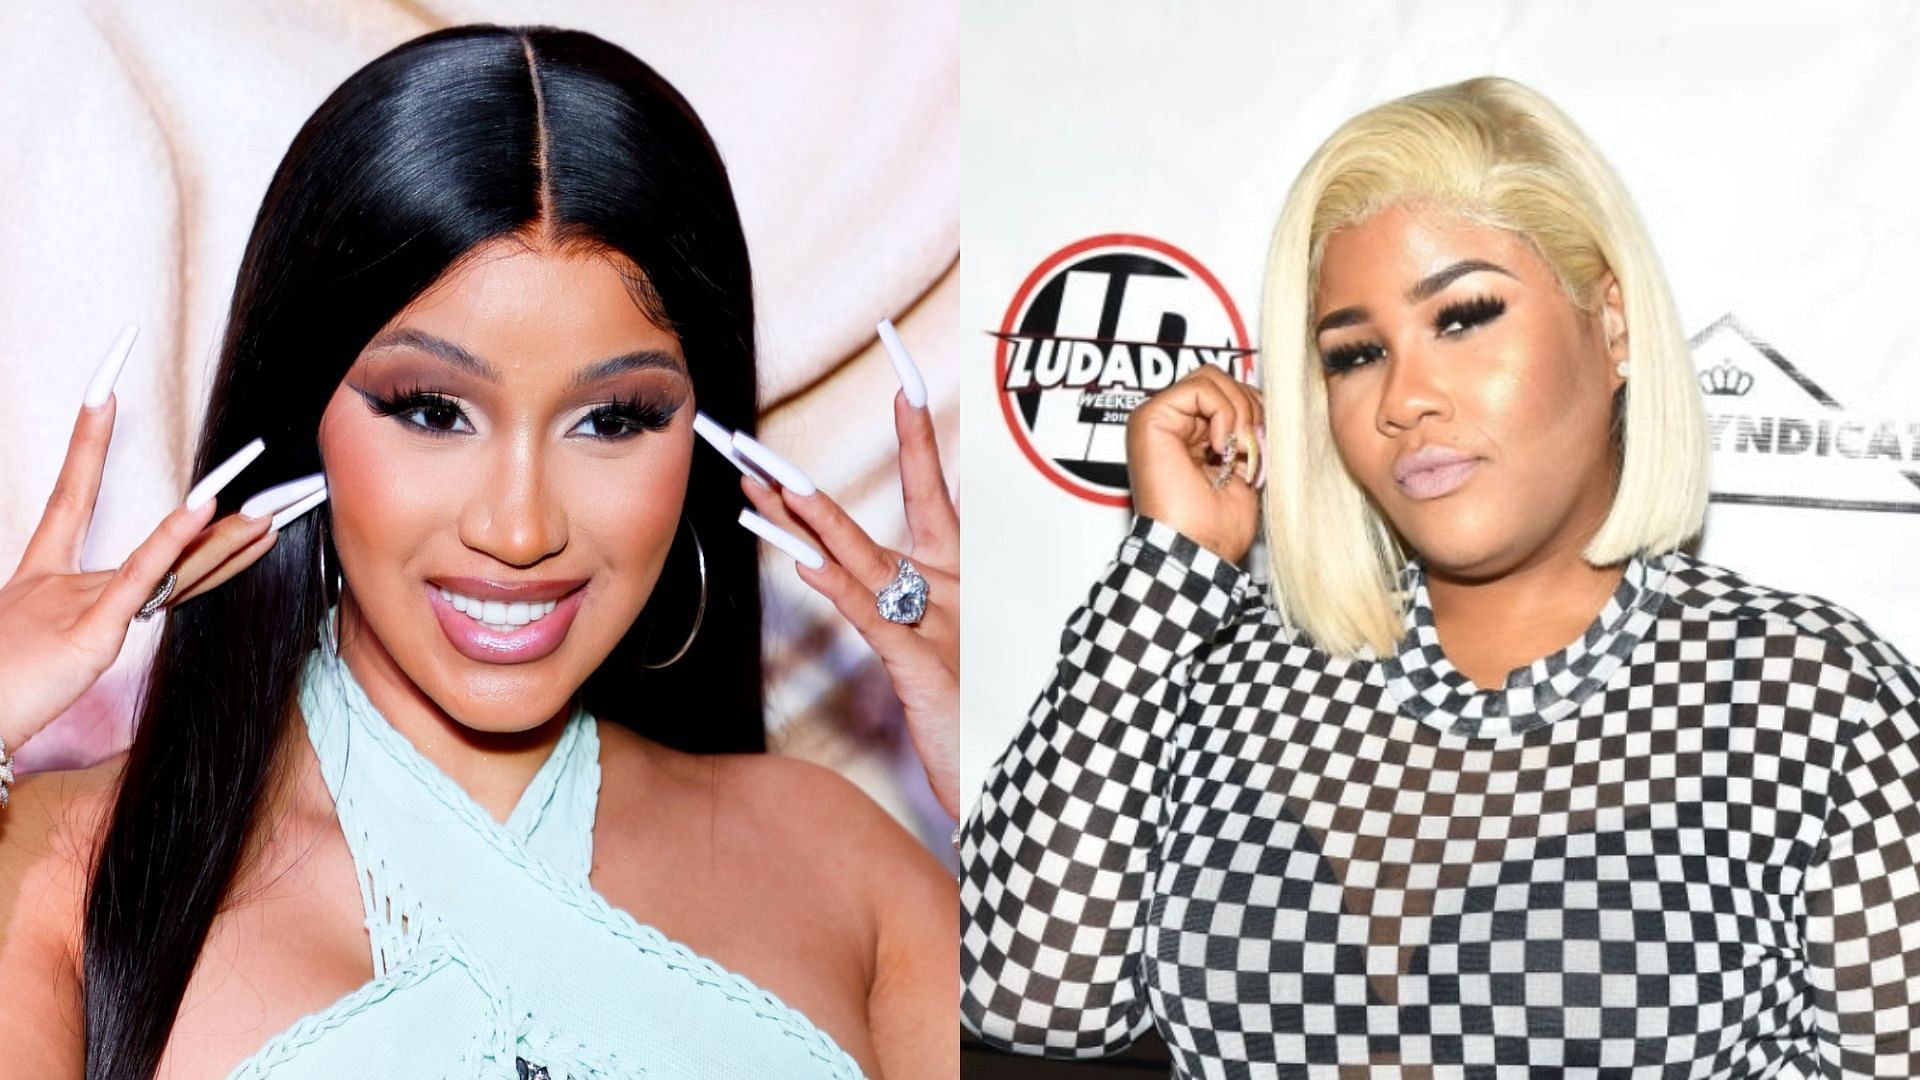 Cardi B and Akbar V feud on Twitter. (Images via Arturo Holmes/Getty Images and Paras Griffin/Getty Images)